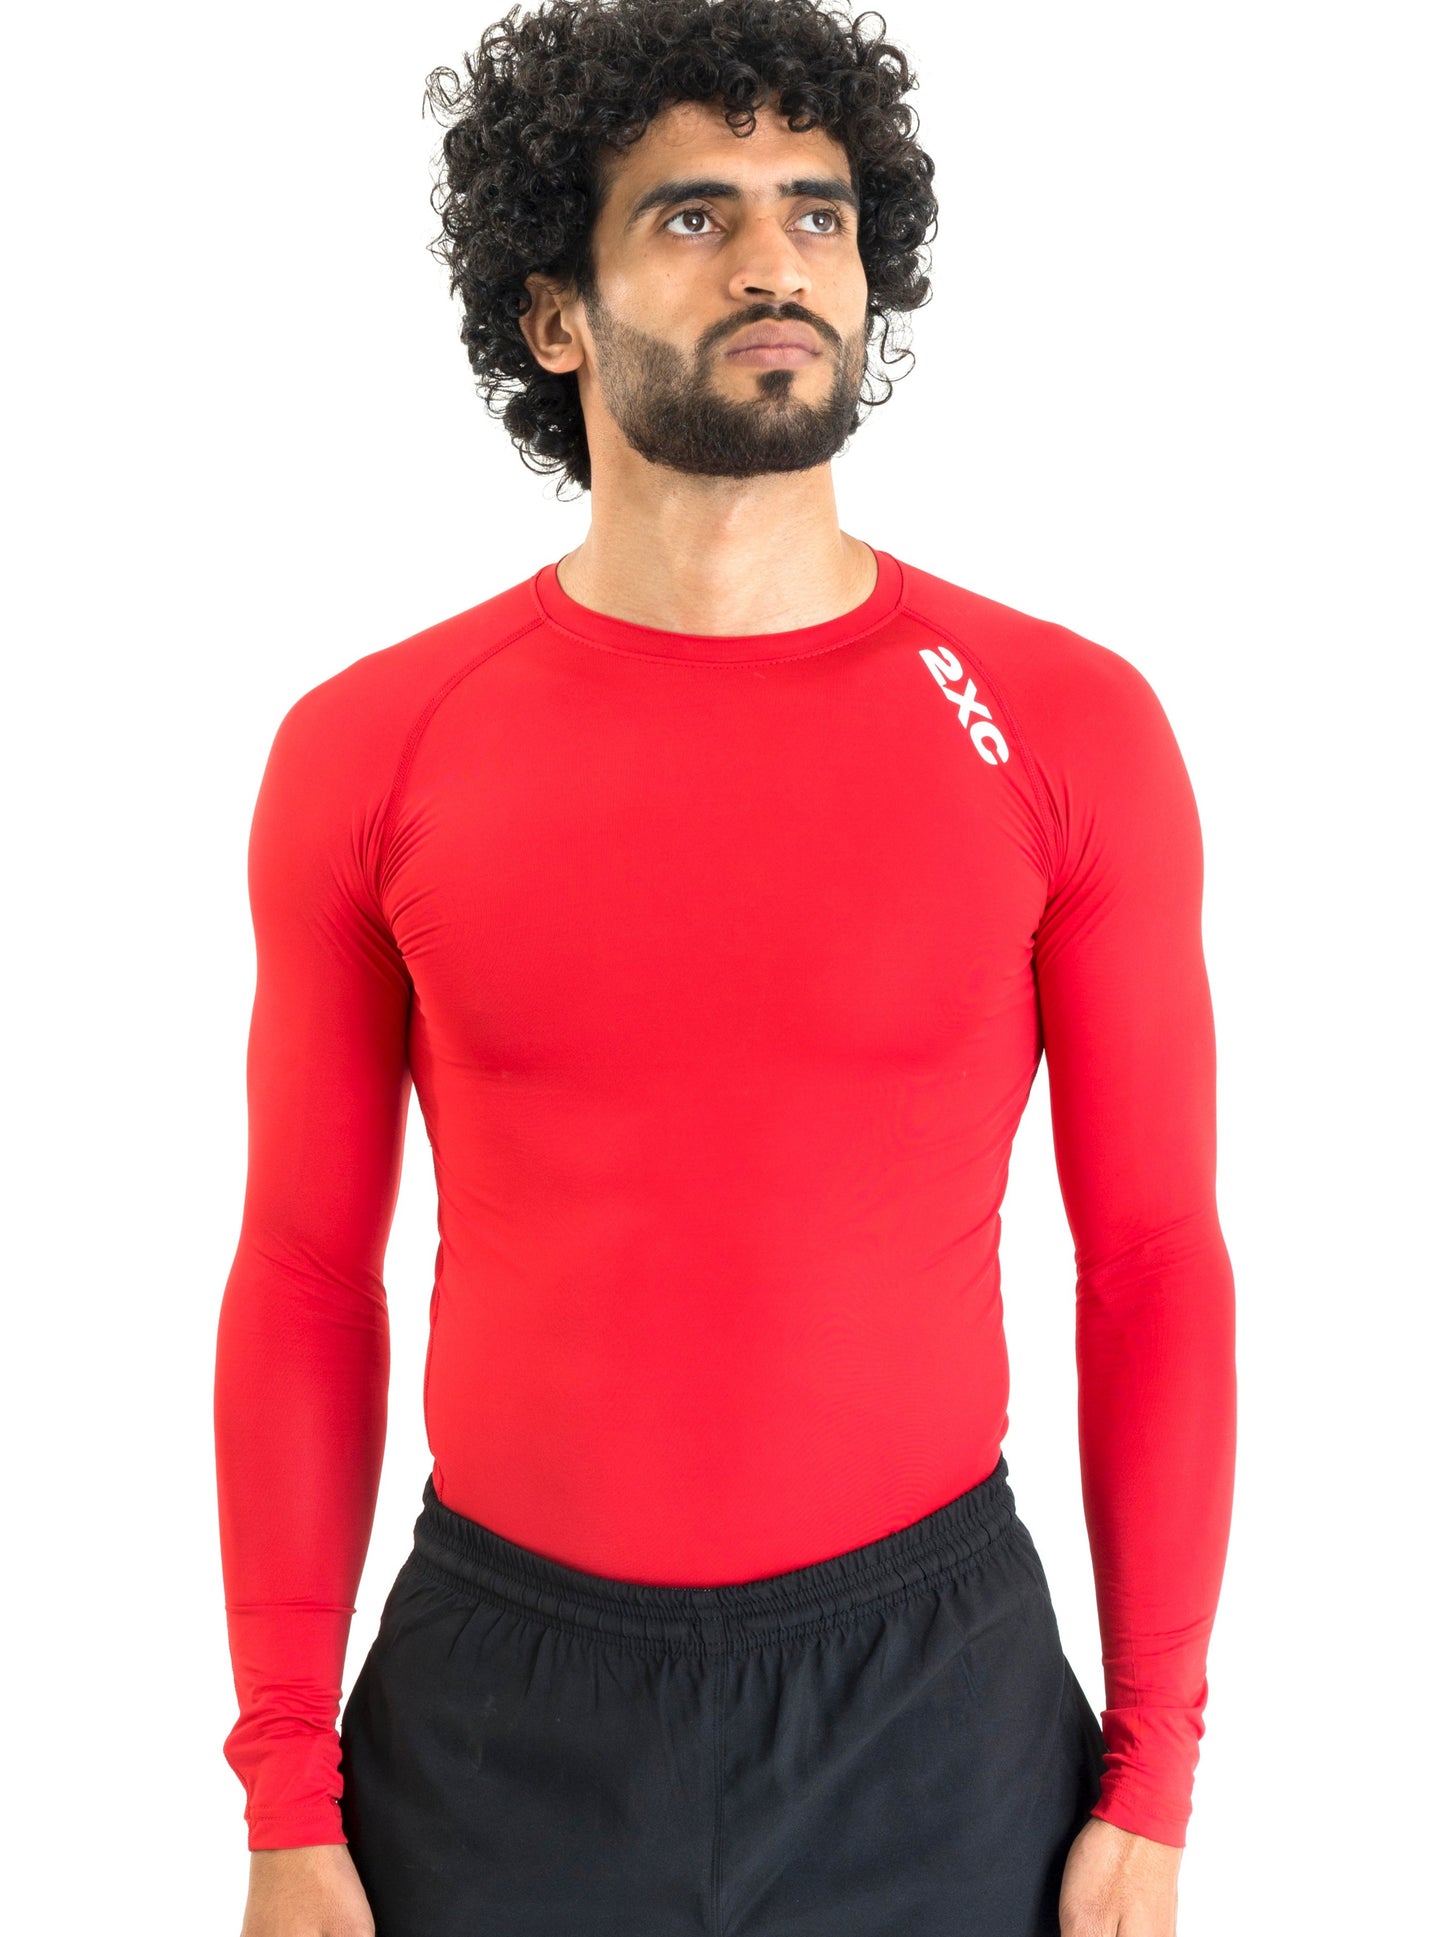 RED FULL SLEEVE COMPRESSION TSHIRT/ SKINS